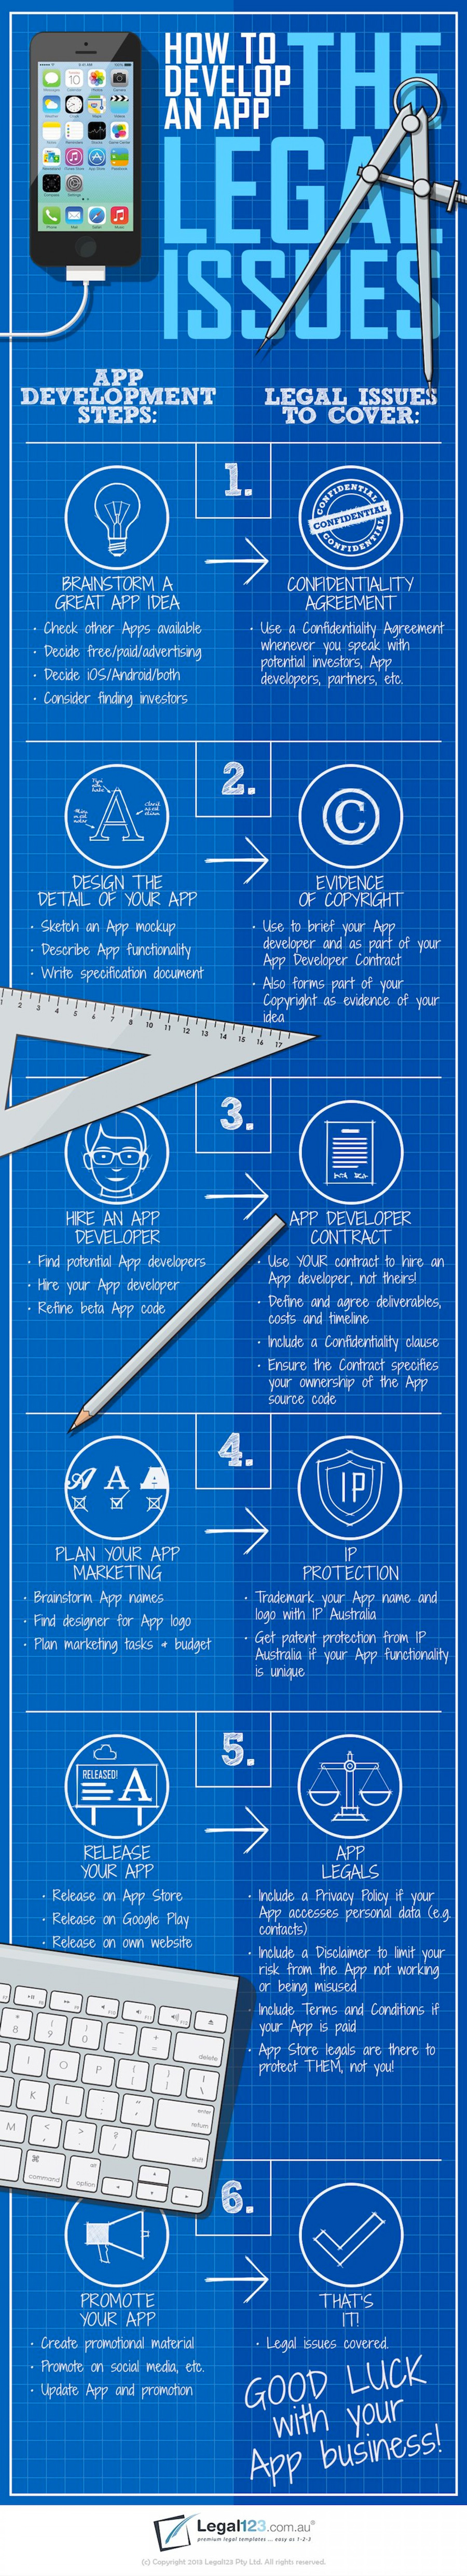 developing-an-app-the-legal-issues-infographic